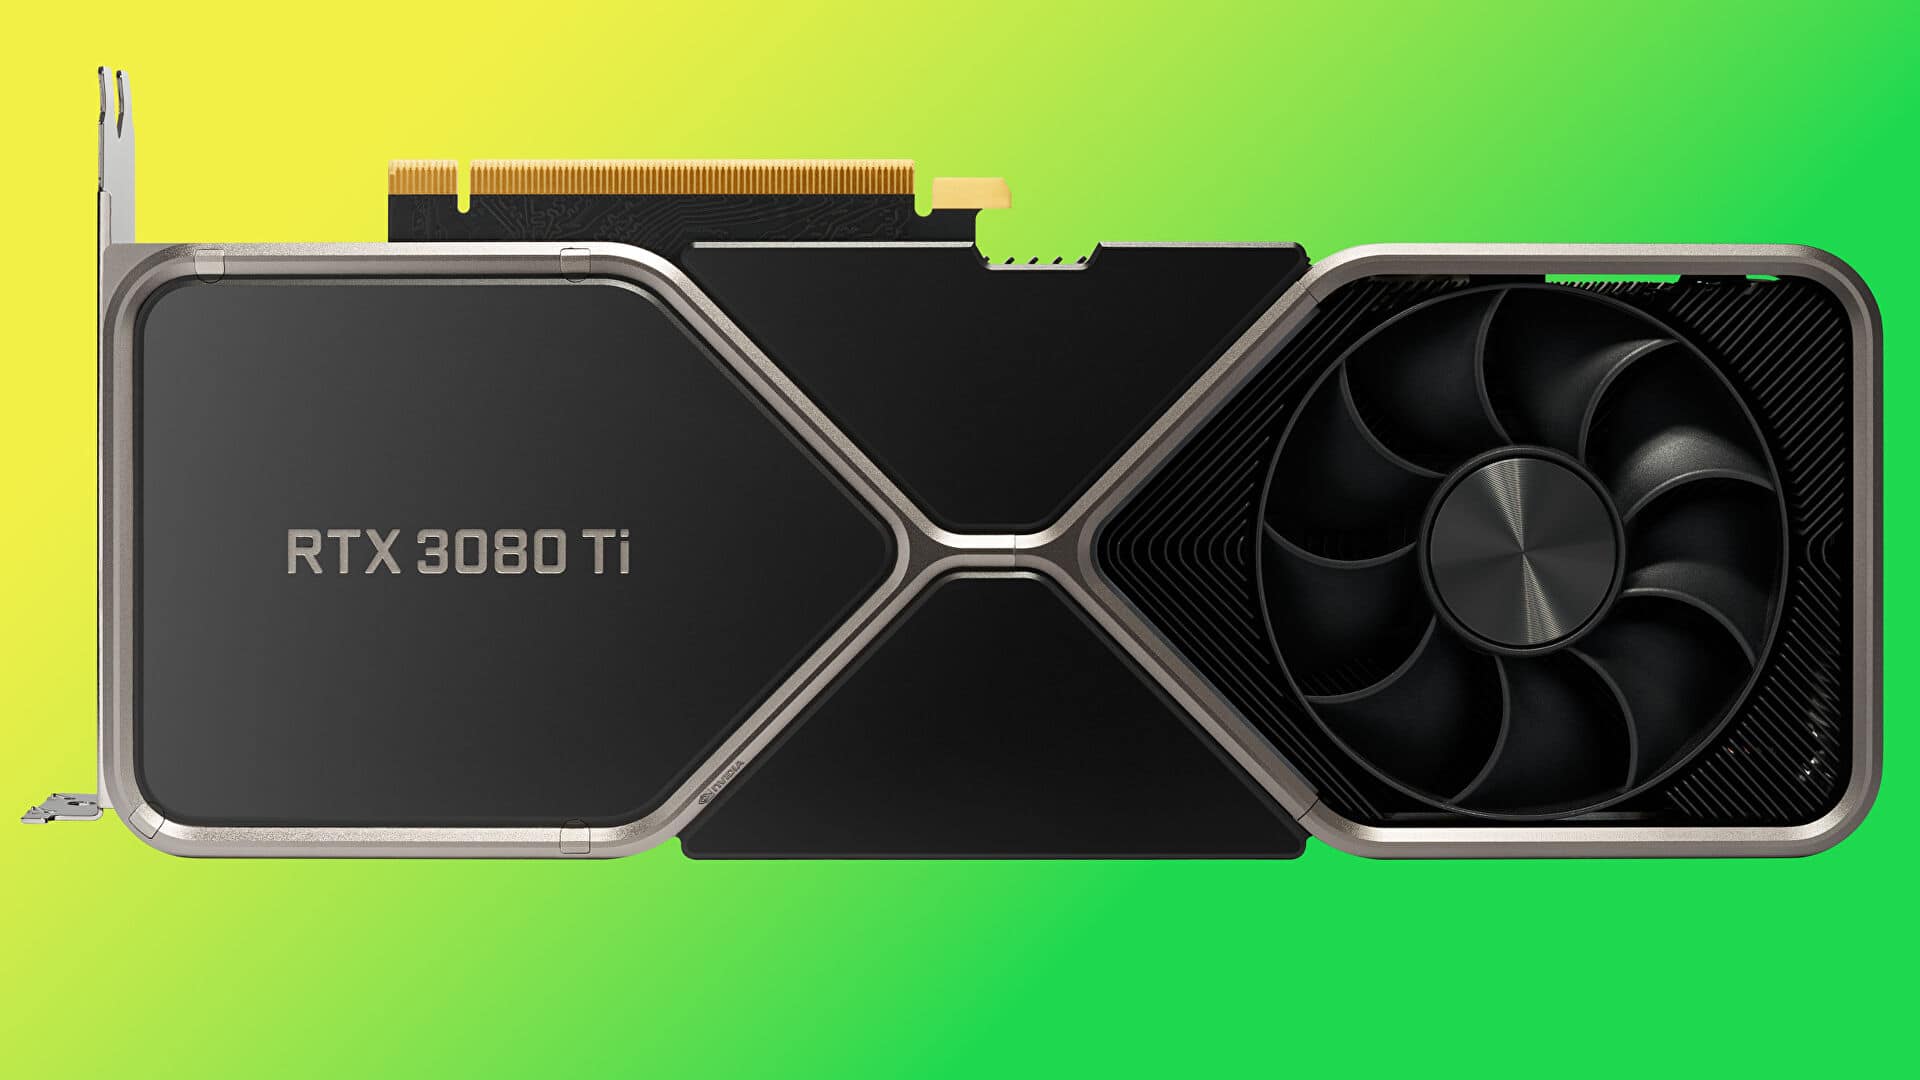 Nvidia RTX 3080 Ti Founders Edition is £1049 at Scan